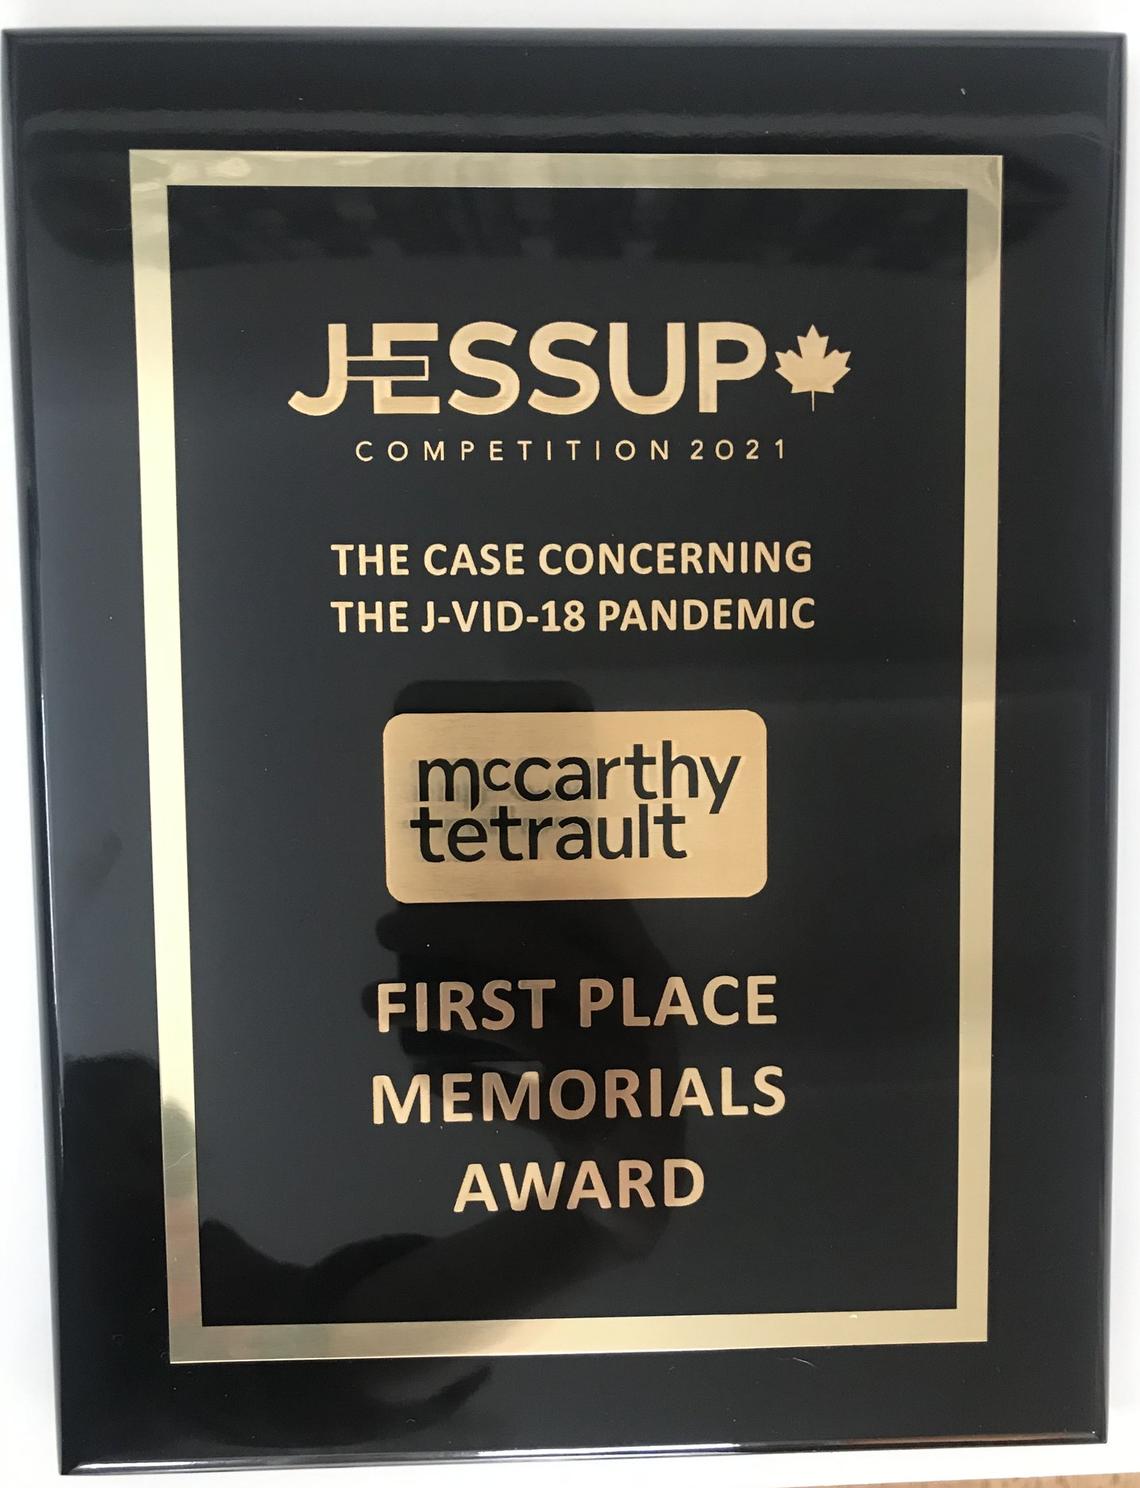 Jessup plaque for First Place Memorials Award